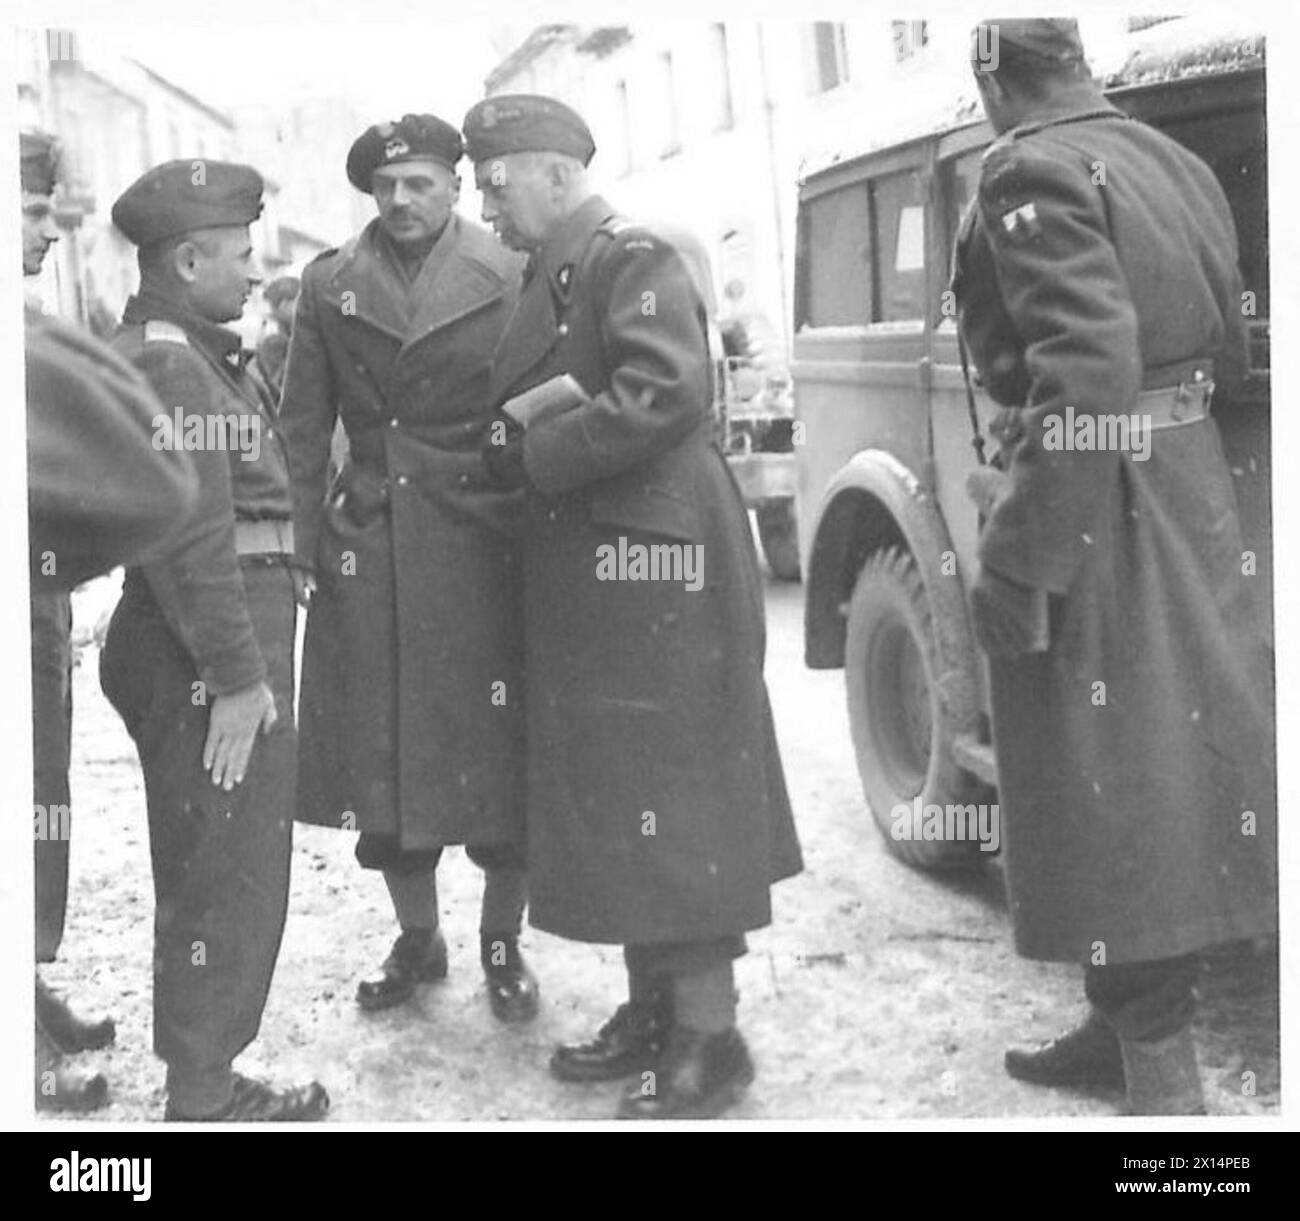 THE POLISH ARMY IN THE ITALIAN CAMPAIGN, 1943-1945 - General Kazimierz Sosnkowski, the C-in-C of the Polish Armed Forces, arriving at the 3rd Carpathian Rifles Division HQ (2nd Polish Corps) at Carpinone, 28/29 March 1944. He is greeted by General Bolesław Duch, the Commander of the Division, and accompanied by General Władysław Anders, the Commander of the 2nd Polish Corps Polish Army, Polish Armed Forces in the West, Polish Corps, II, Polish Armed Forces in the West, Carpathian Rifles Divisior, 3, 8th Army, Sosnkowski, Kazimierz, Duch, Bolesław Bronisław, Anders, Władysław Stock Photo